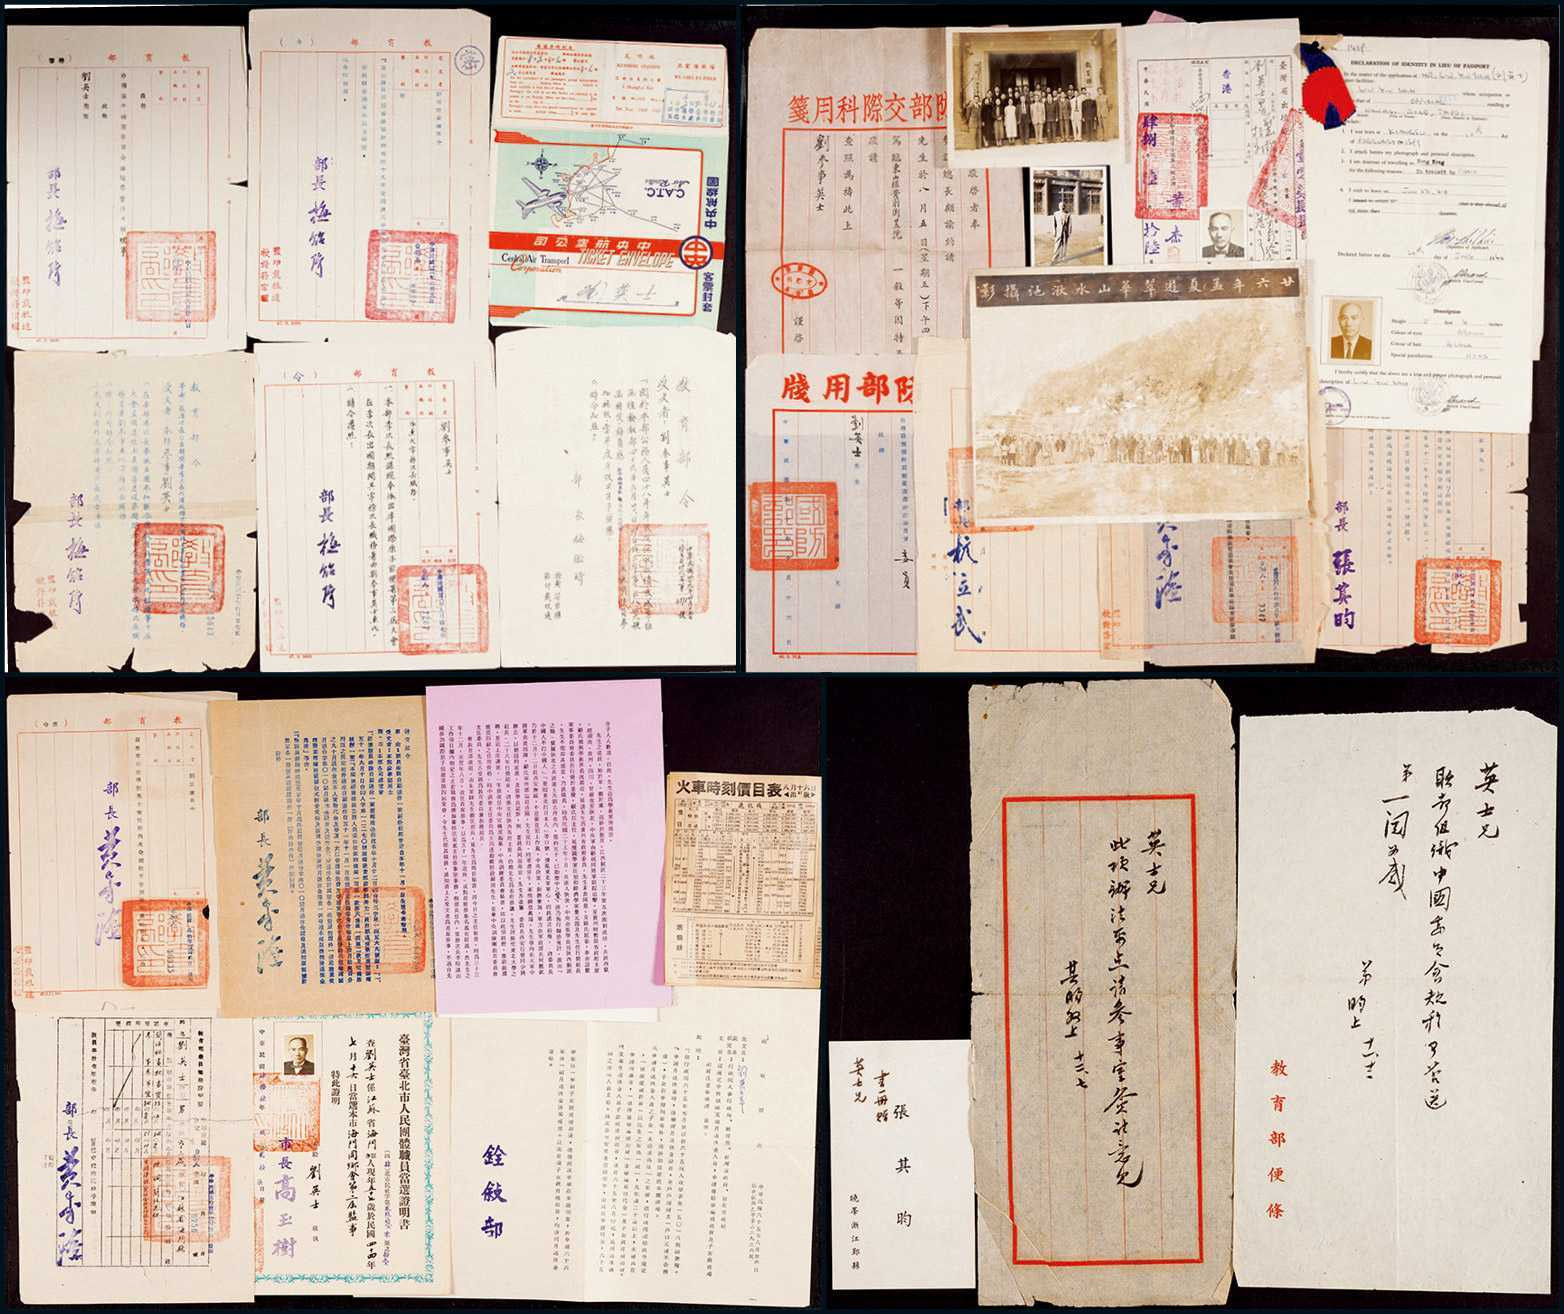 A set of appointment letters, letters, photos and materials collected by Liu Yingshi